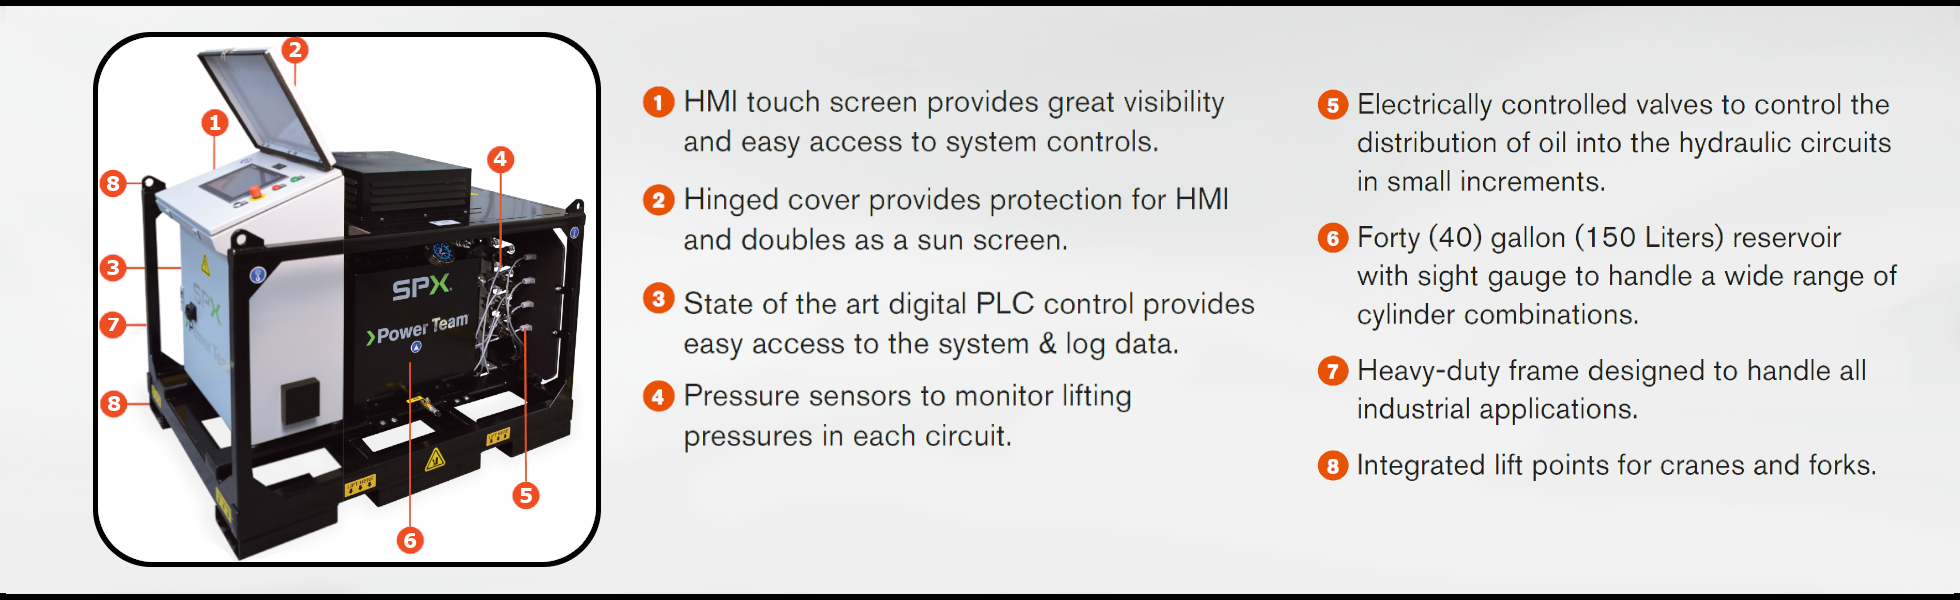 Motion Control System Key Features